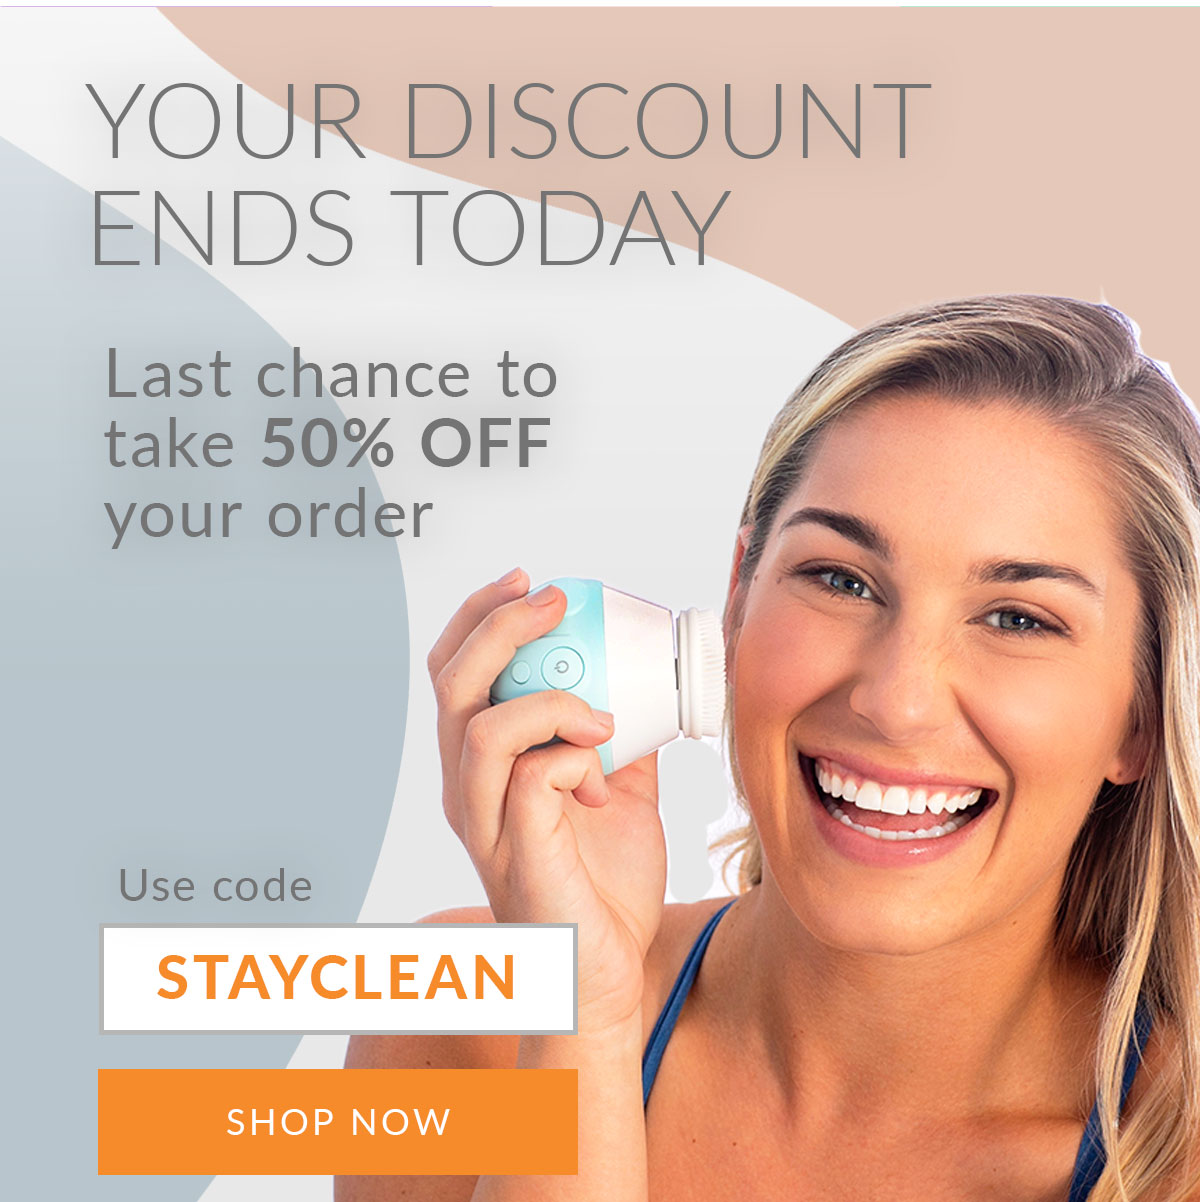 YOUR DISCOUNT BNDS TOURS Last chance to take 50% OFF your order Use code STAYCLEAN 